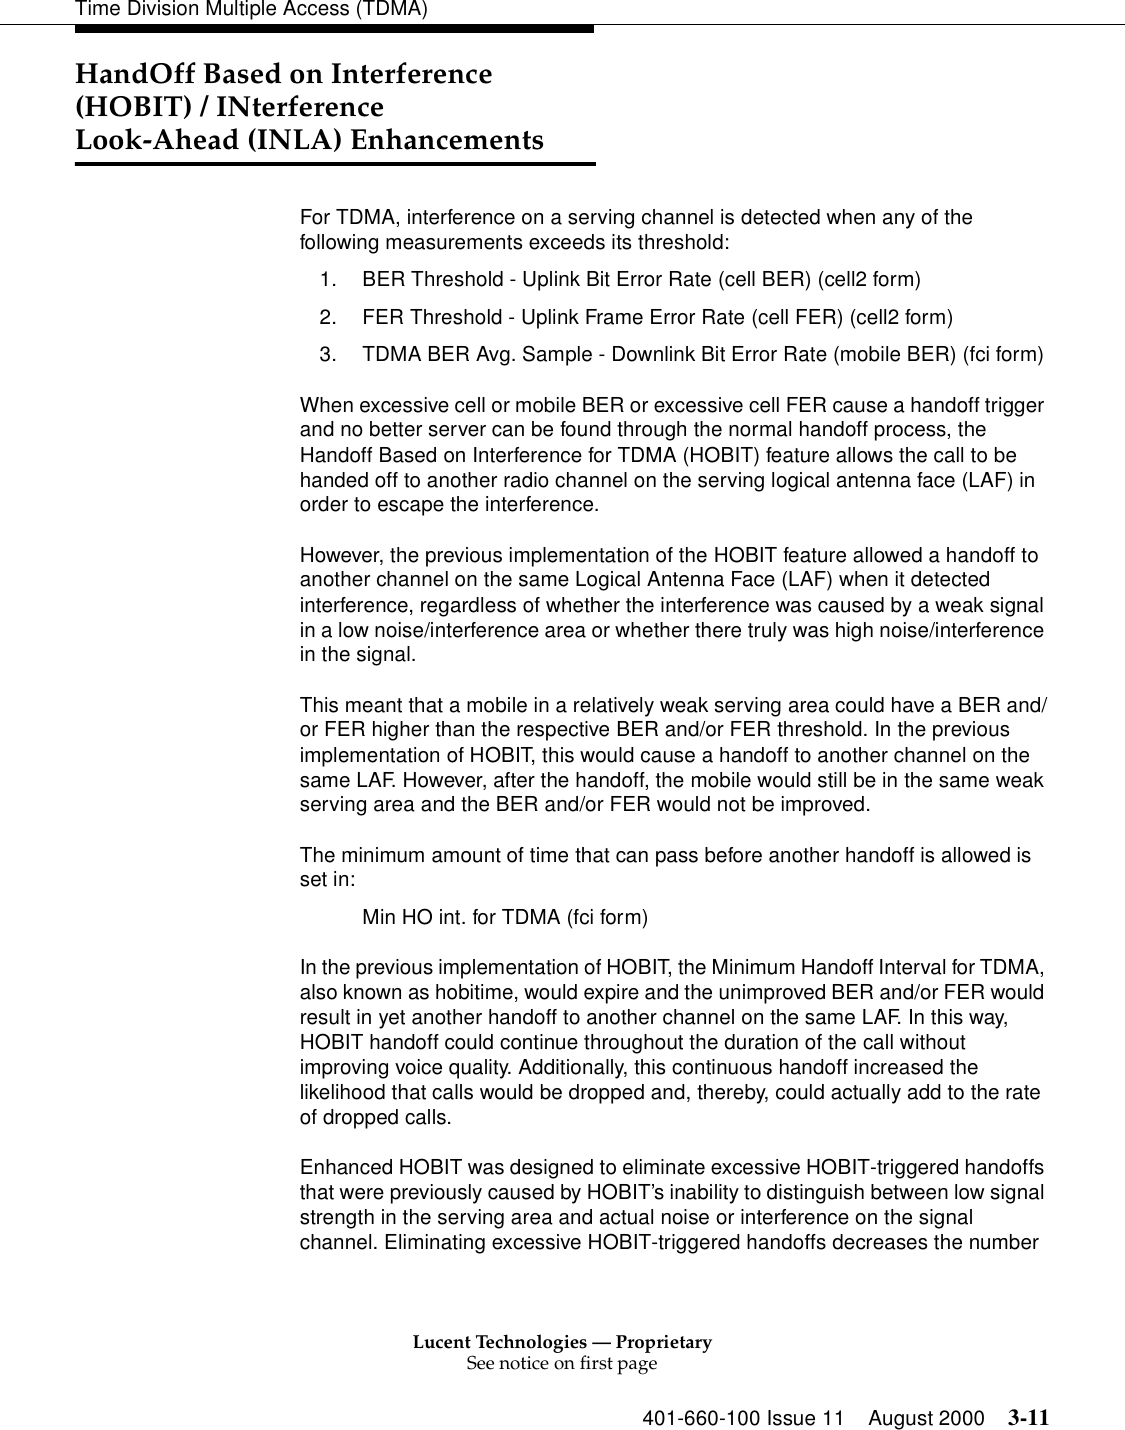 Lucent Technologies — ProprietarySee notice on first page401-660-100 Issue 11 August 2000 3-11Time Division Multiple Access (TDMA)HandOff Based on Interference (HOBIT) / INterference Look-Ahead (INLA) EnhancementsFor TDMA, interference on a serving channel is detected when any of the following measurements exceeds its threshold: 1. BER Threshold - Uplink Bit Error Rate (cell BER) (cell2 form) 2. FER Threshold - Uplink Frame Error Rate (cell FER) (cell2 form) 3. TDMA BER Avg. Sample - Downlink Bit Error Rate (mobile BER) (fci form) When excessive cell or mobile BER or excessive cell FER cause a handoff trigger and no better server can be found through the normal handoff process, the Handoff Based on Interference for TDMA (HOBIT) feature allows the call to be handed off to another radio channel on the serving logical antenna face (LAF) in order to escape the interference. However, the previous implementation of the HOBIT feature allowed a handoff to another channel on the same Logical Antenna Face (LAF) when it detected interference, regardless of whether the interference was caused by a weak signal in a low noise/interference area or whether there truly was high noise/interference in the signal. This meant that a mobile in a relatively weak serving area could have a BER and/or FER higher than the respective BER and/or FER threshold. In the previous implementation of HOBIT, this would cause a handoff to another channel on the same LAF. However, after the handoff, the mobile would still be in the same weak serving area and the BER and/or FER would not be improved. The minimum amount of time that can pass before another handoff is allowed is set in: Min HO int. for TDMA (fci form) In the previous implementation of HOBIT, the Minimum Handoff Interval for TDMA, also known as hobitime, would expire and the unimproved BER and/or FER would result in yet another handoff to another channel on the same LAF. In this way, HOBIT handoff could continue throughout the duration of the call without improving voice quality. Additionally, this continuous handoff increased the likelihood that calls would be dropped and, thereby, could actually add to the rate of dropped calls. Enhanced HOBIT was designed to eliminate excessive HOBIT-triggered handoffs that were previously caused by HOBIT’s inability to distinguish between low signal strength in the serving area and actual noise or interference on the signal channel. Eliminating excessive HOBIT-triggered handoffs decreases the number 